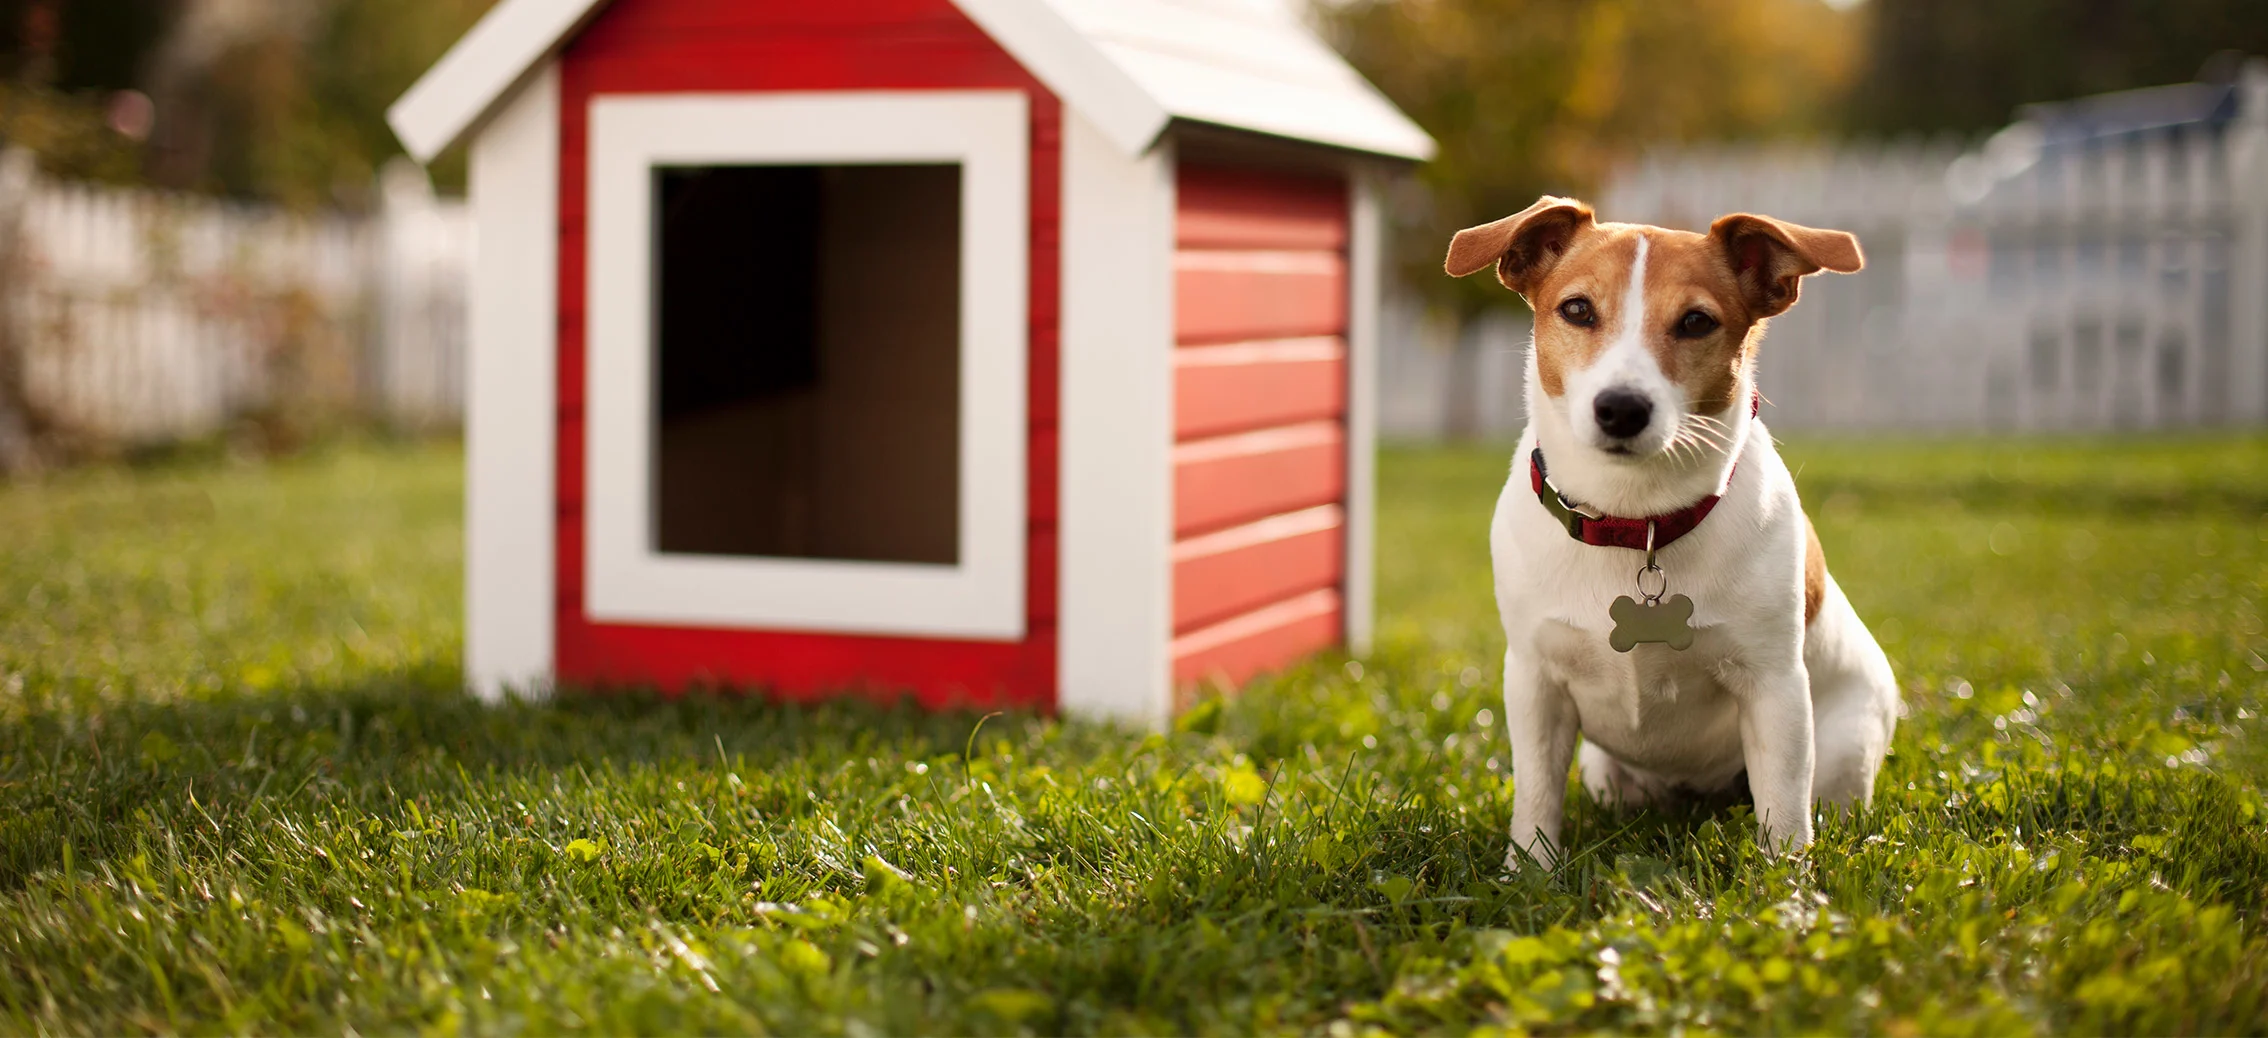 How To Clean Dog House